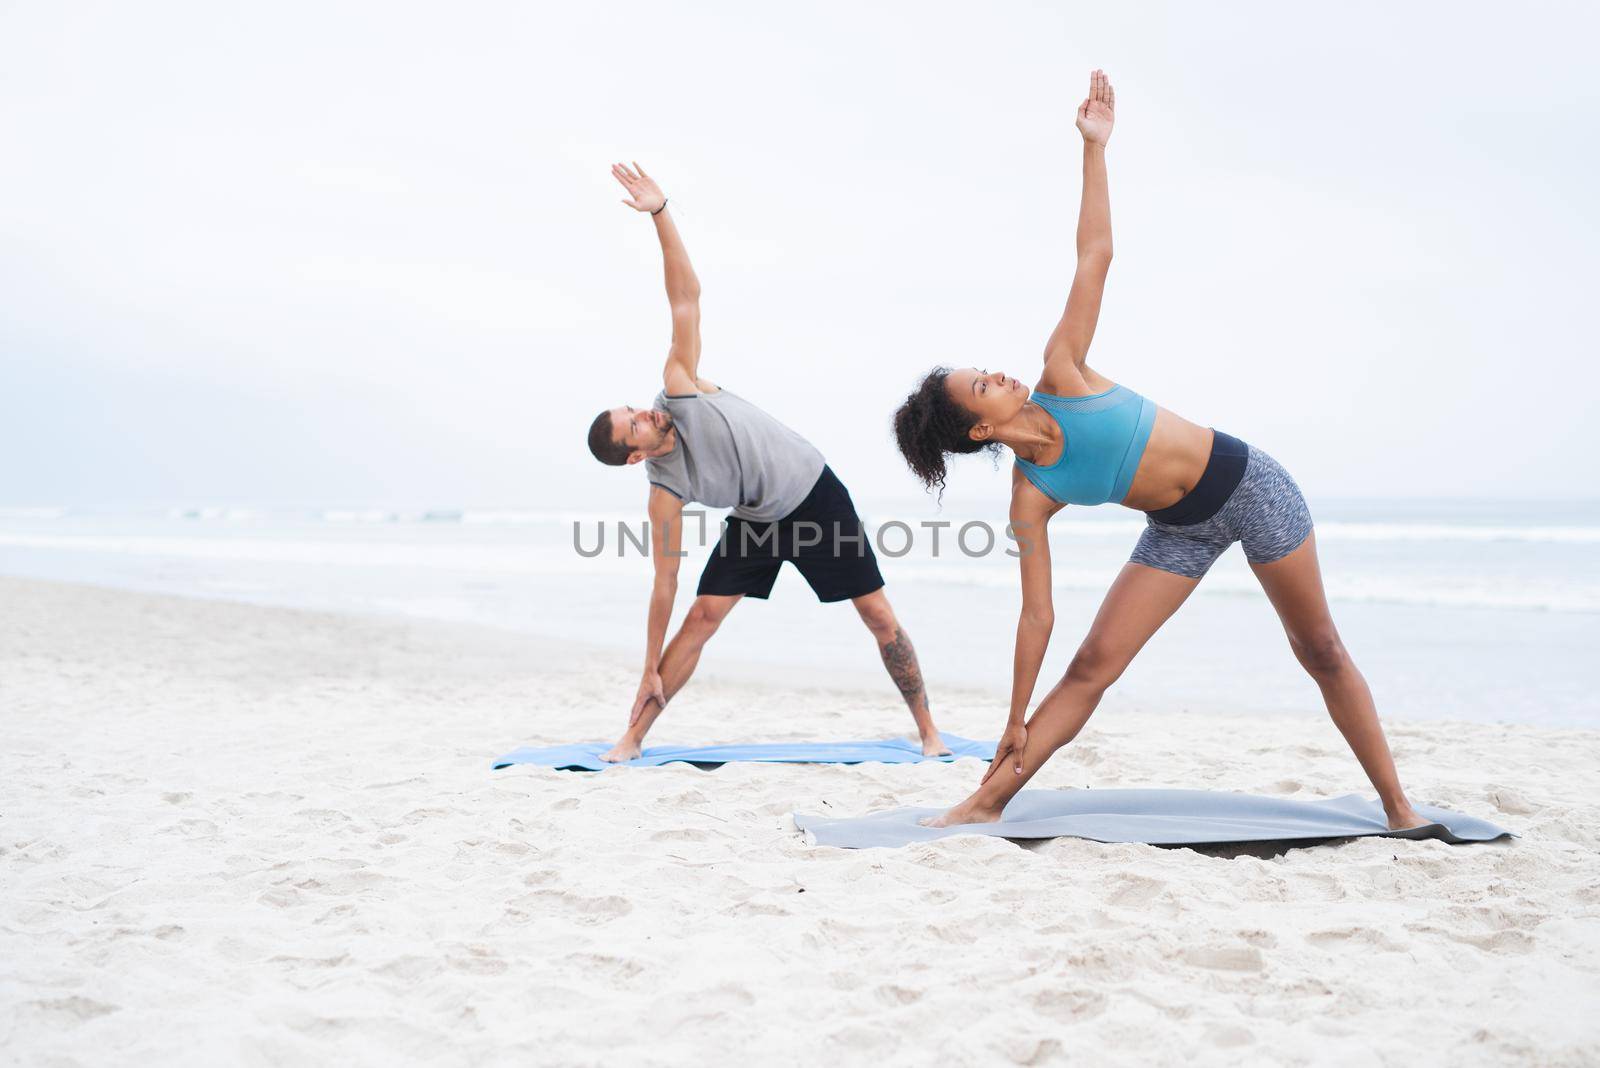 Yoga lies at the core of their wellbeing. a young man and woman practising yoga together at the beach. by YuriArcurs